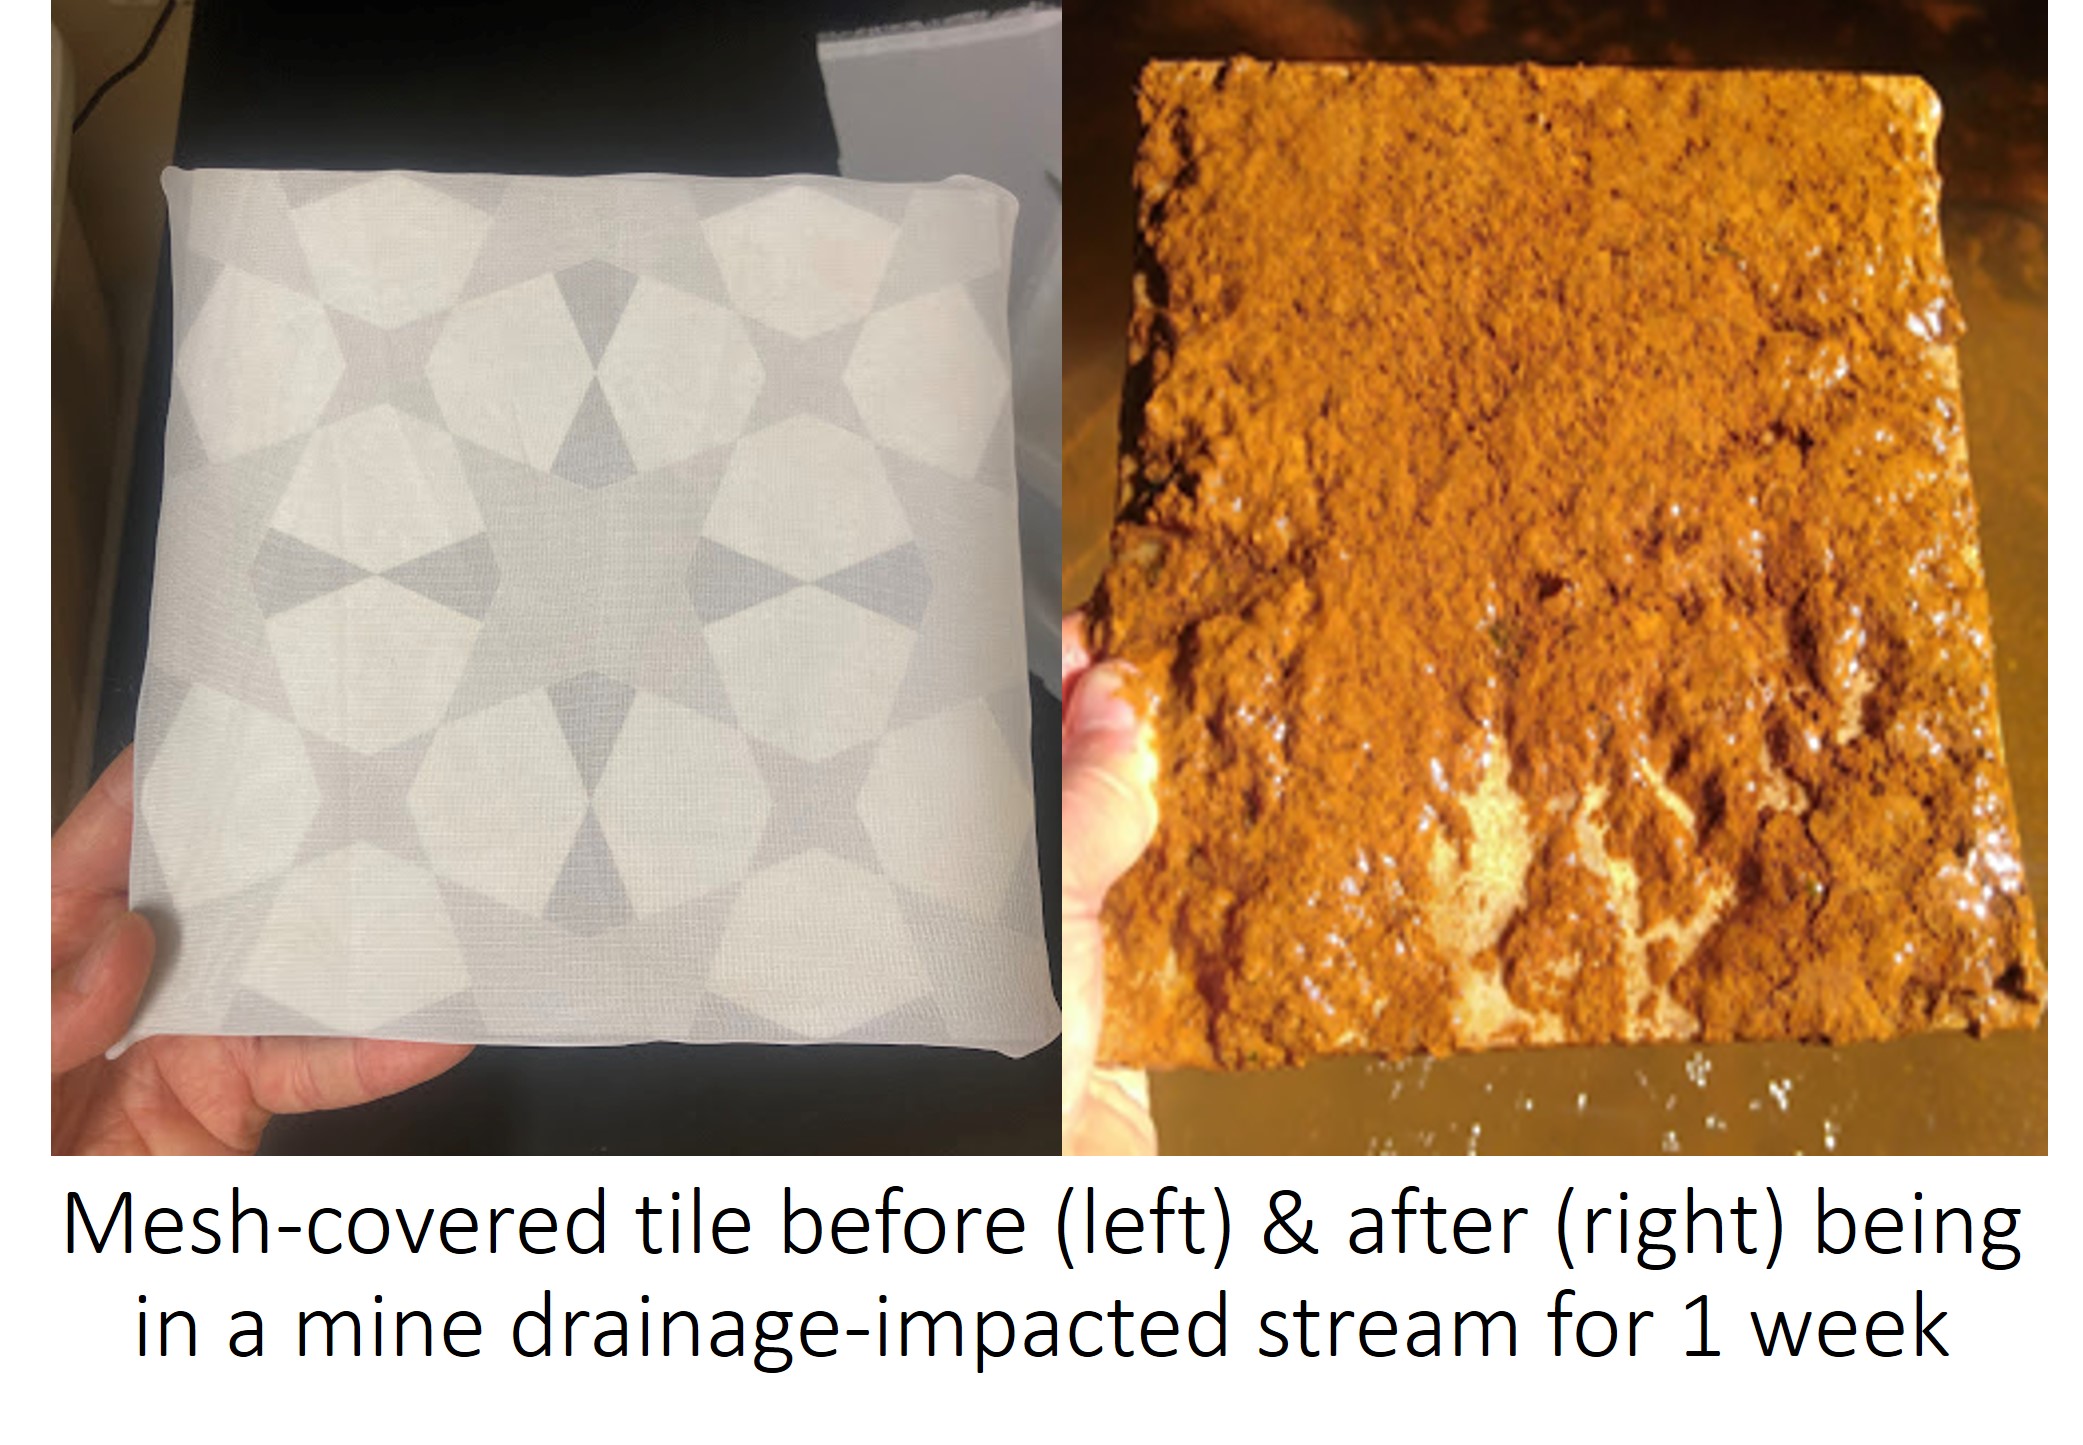 A mesh-covered tile before and after being in a mine drainage-impacted stream for one week.